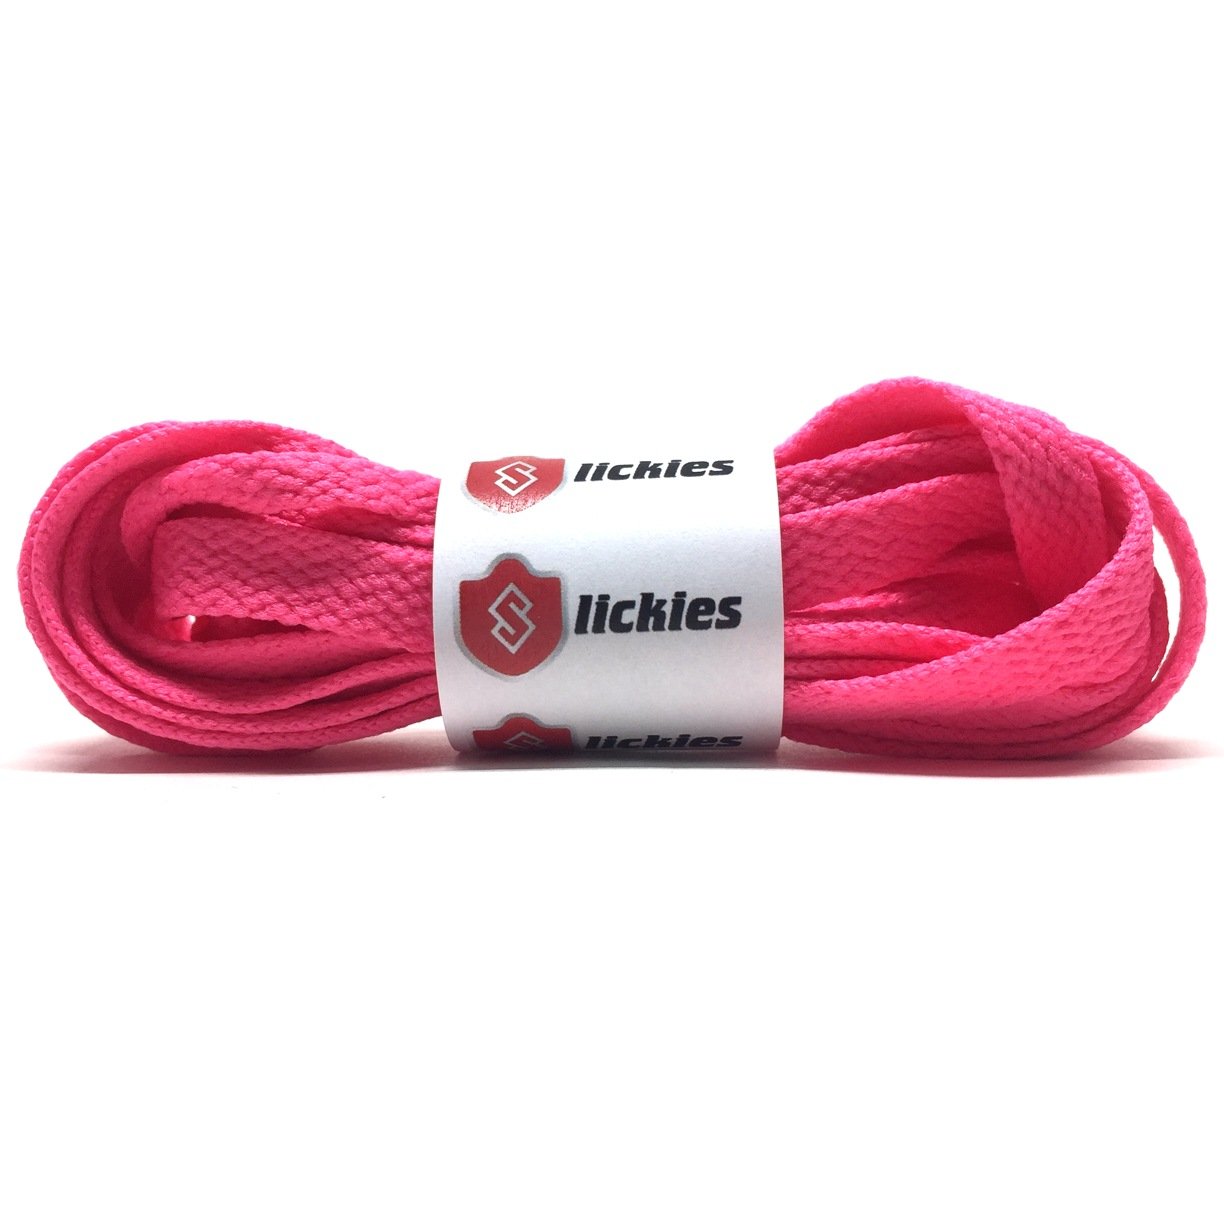 pink air force laces